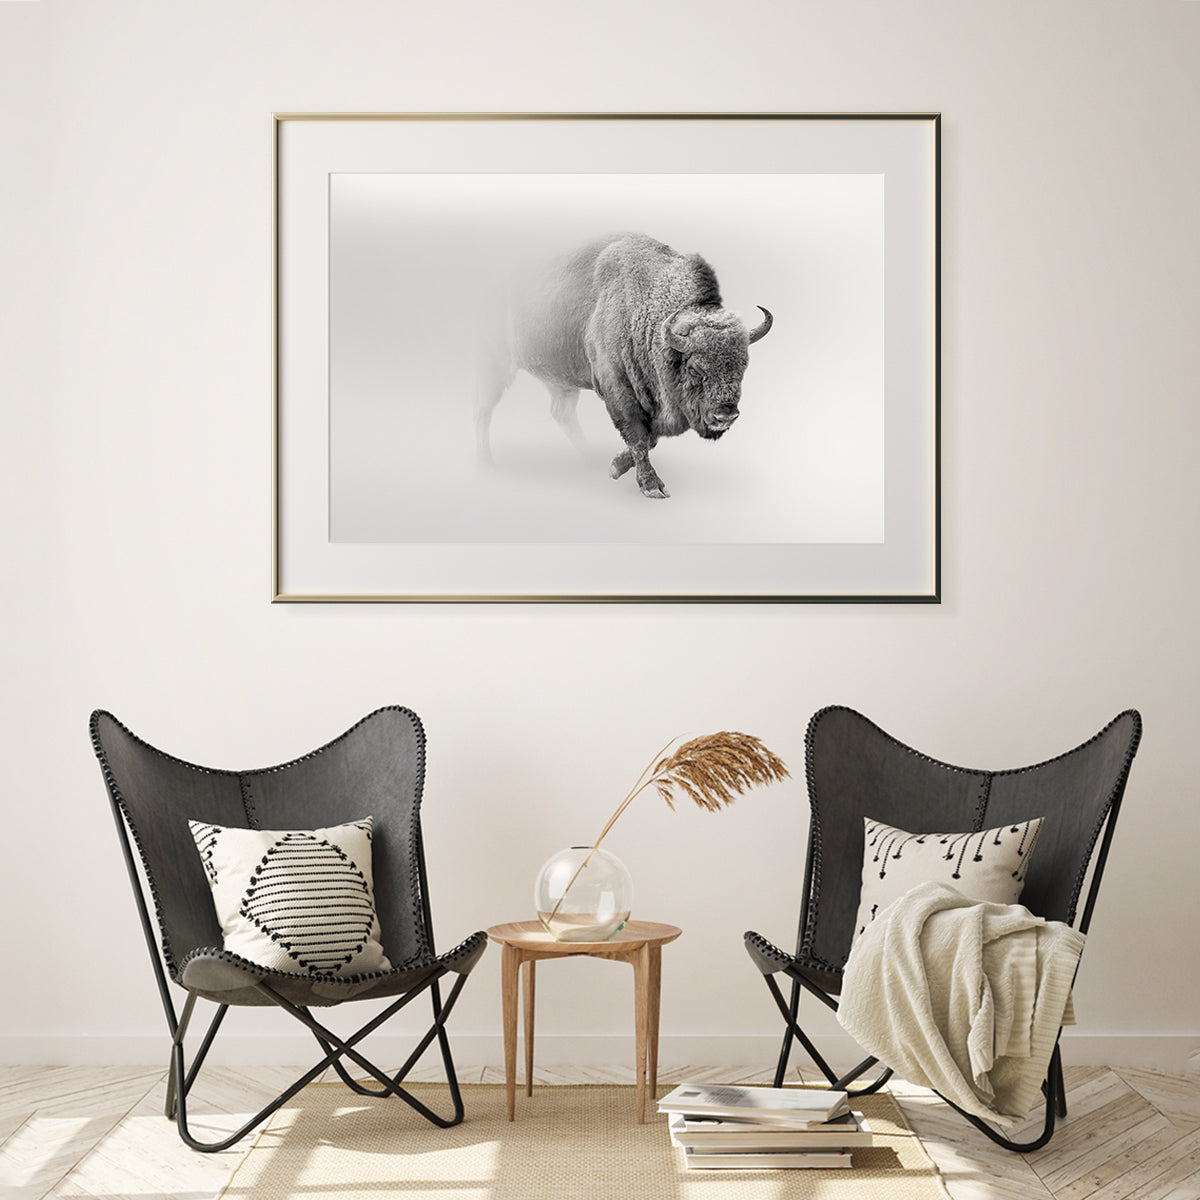 Bison Black And White Posters-Horizontal Posters NOT FRAMED-CetArt-10″x8″ inches-CetArt